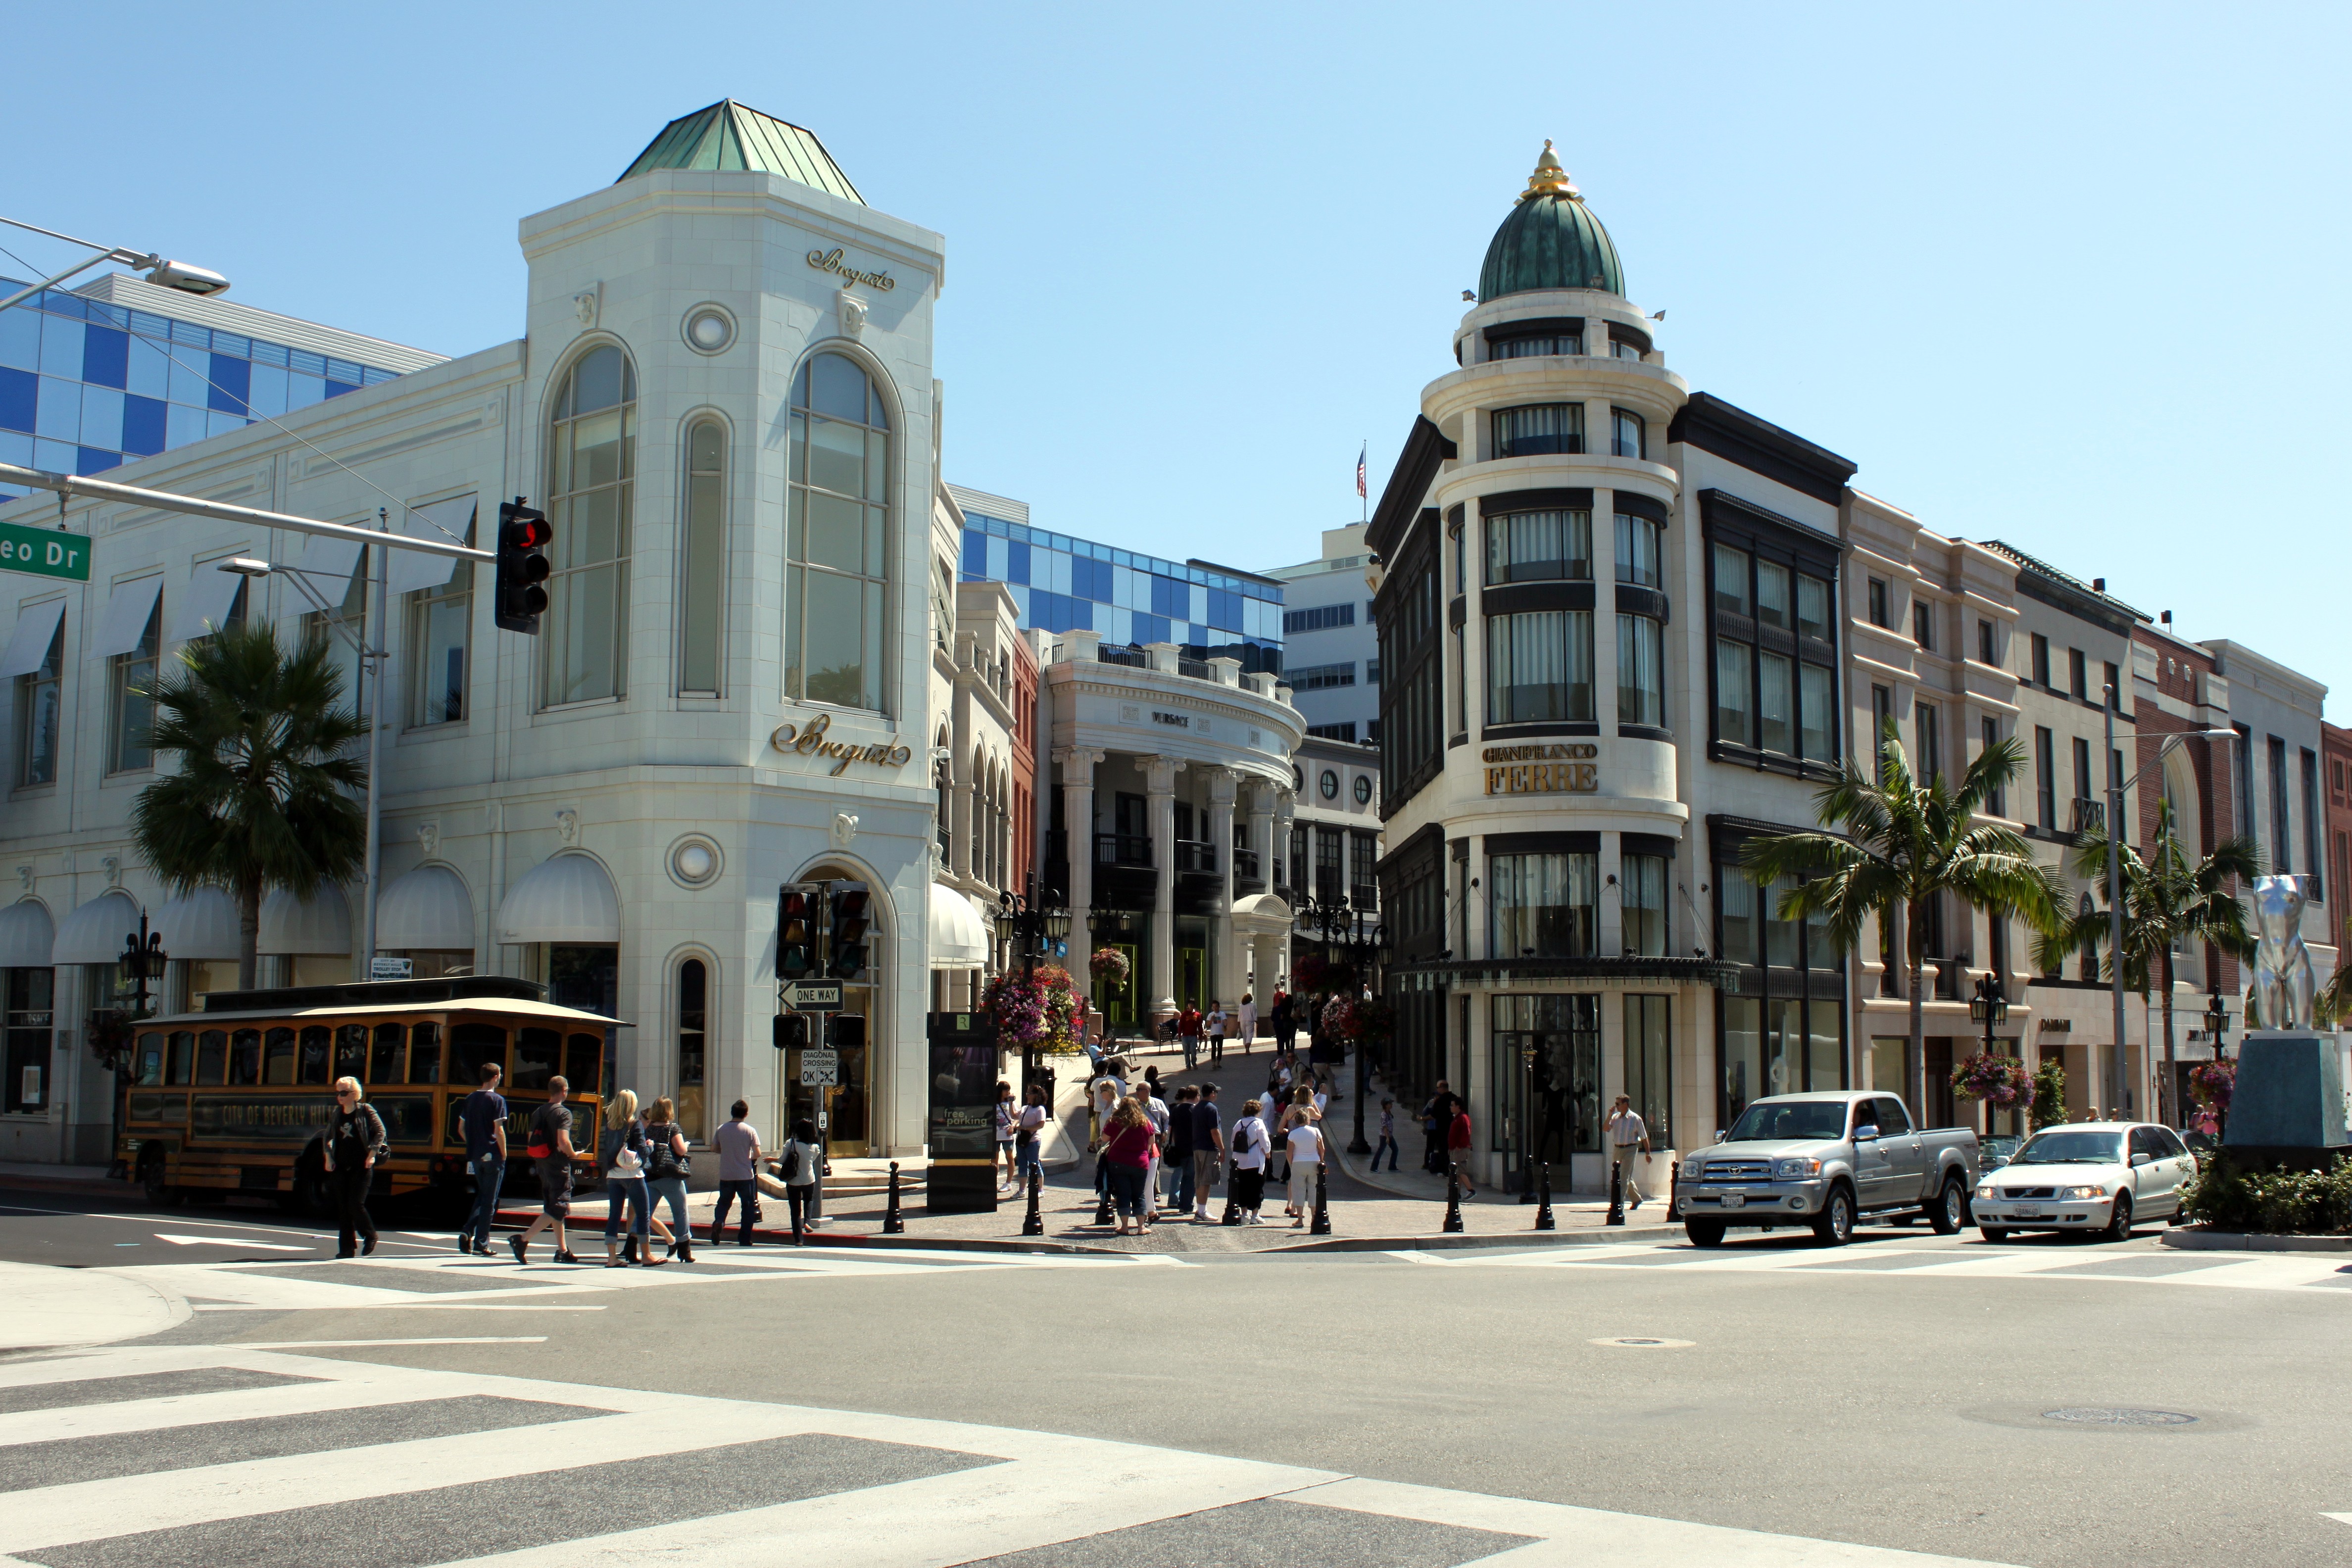 Rodeo Drive shopping area in Beverly Hills Los Angeles California